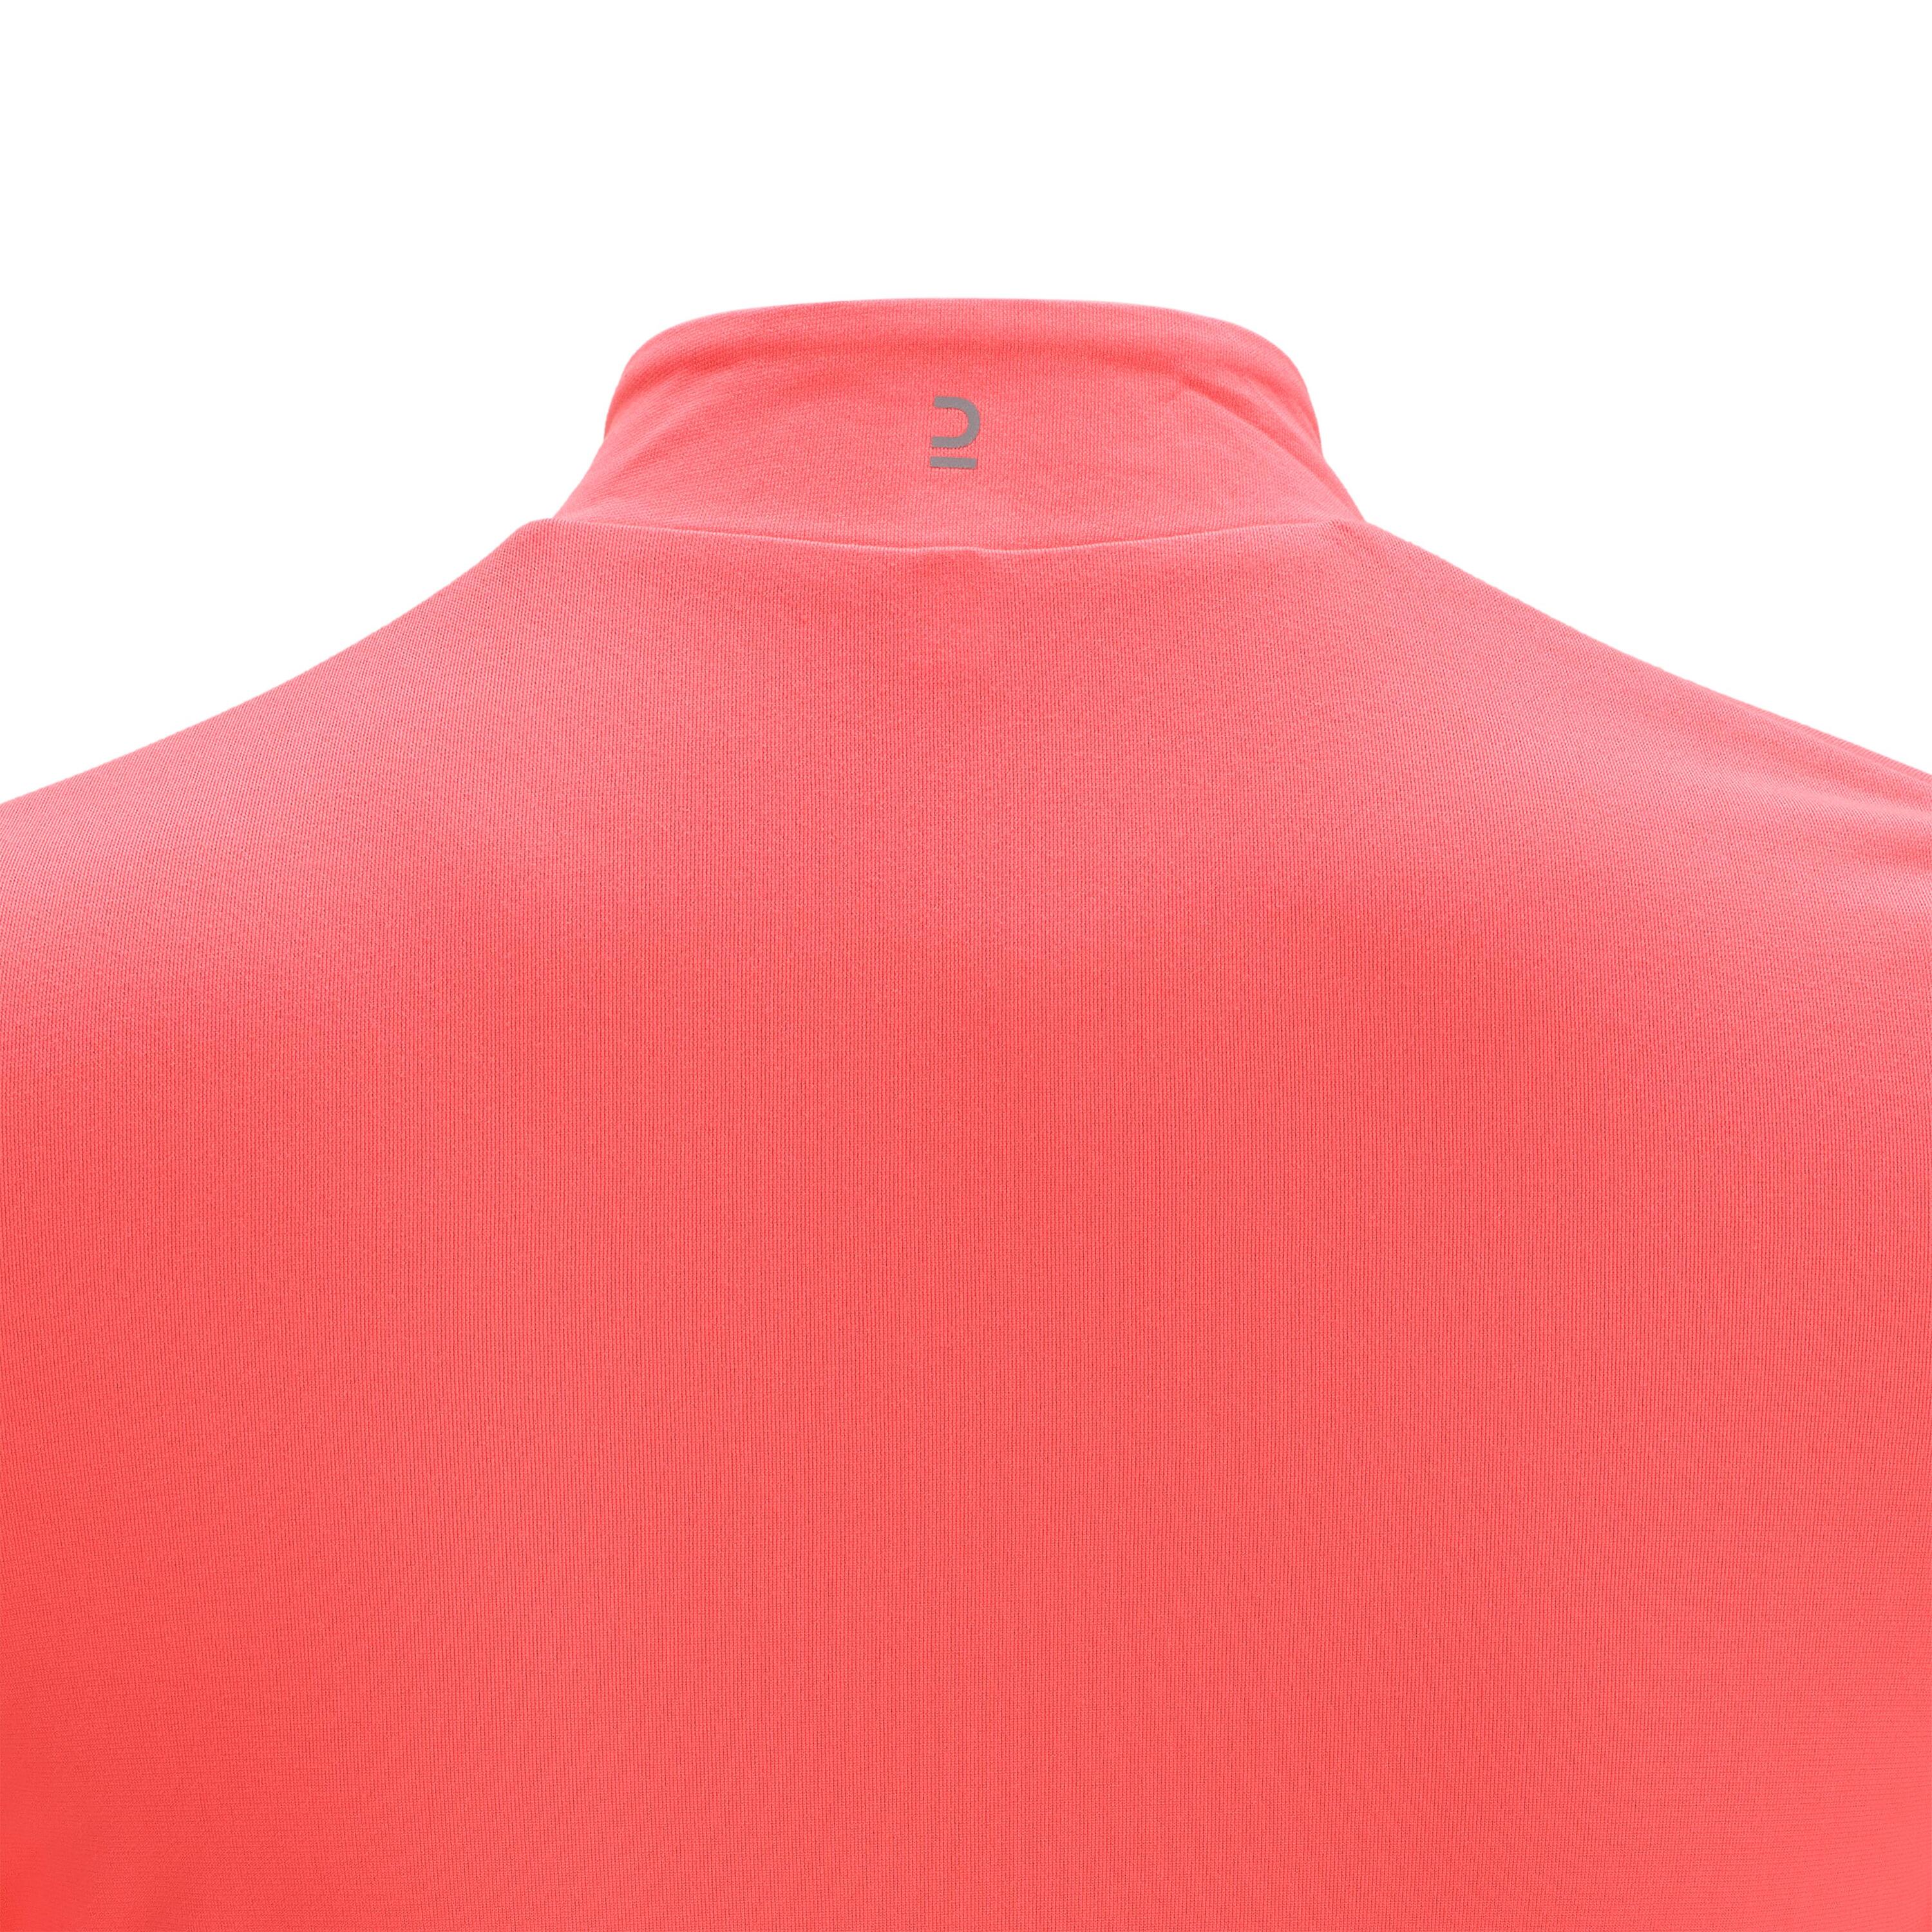 100 Women's Long-Sleeved Road Cycling Jersey - Coral 7/7